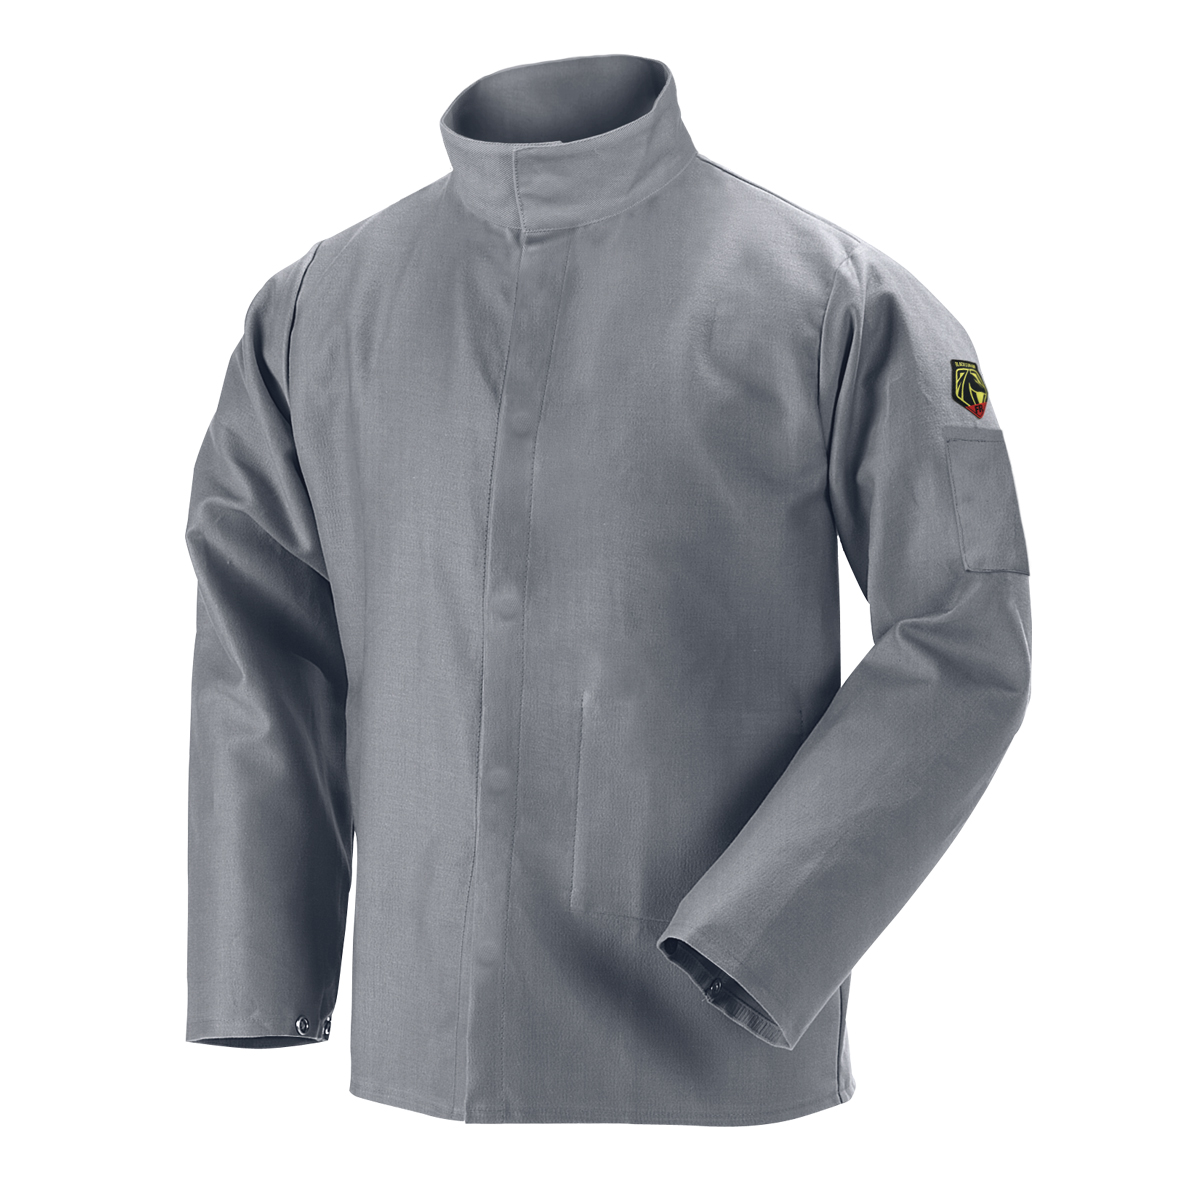 Picture of Black Stallion JF2220-GY 9 OZ DELUXE FLAME RESISTANT COTTON WELDING JACKET - NFPA 2112, NFPA 70E